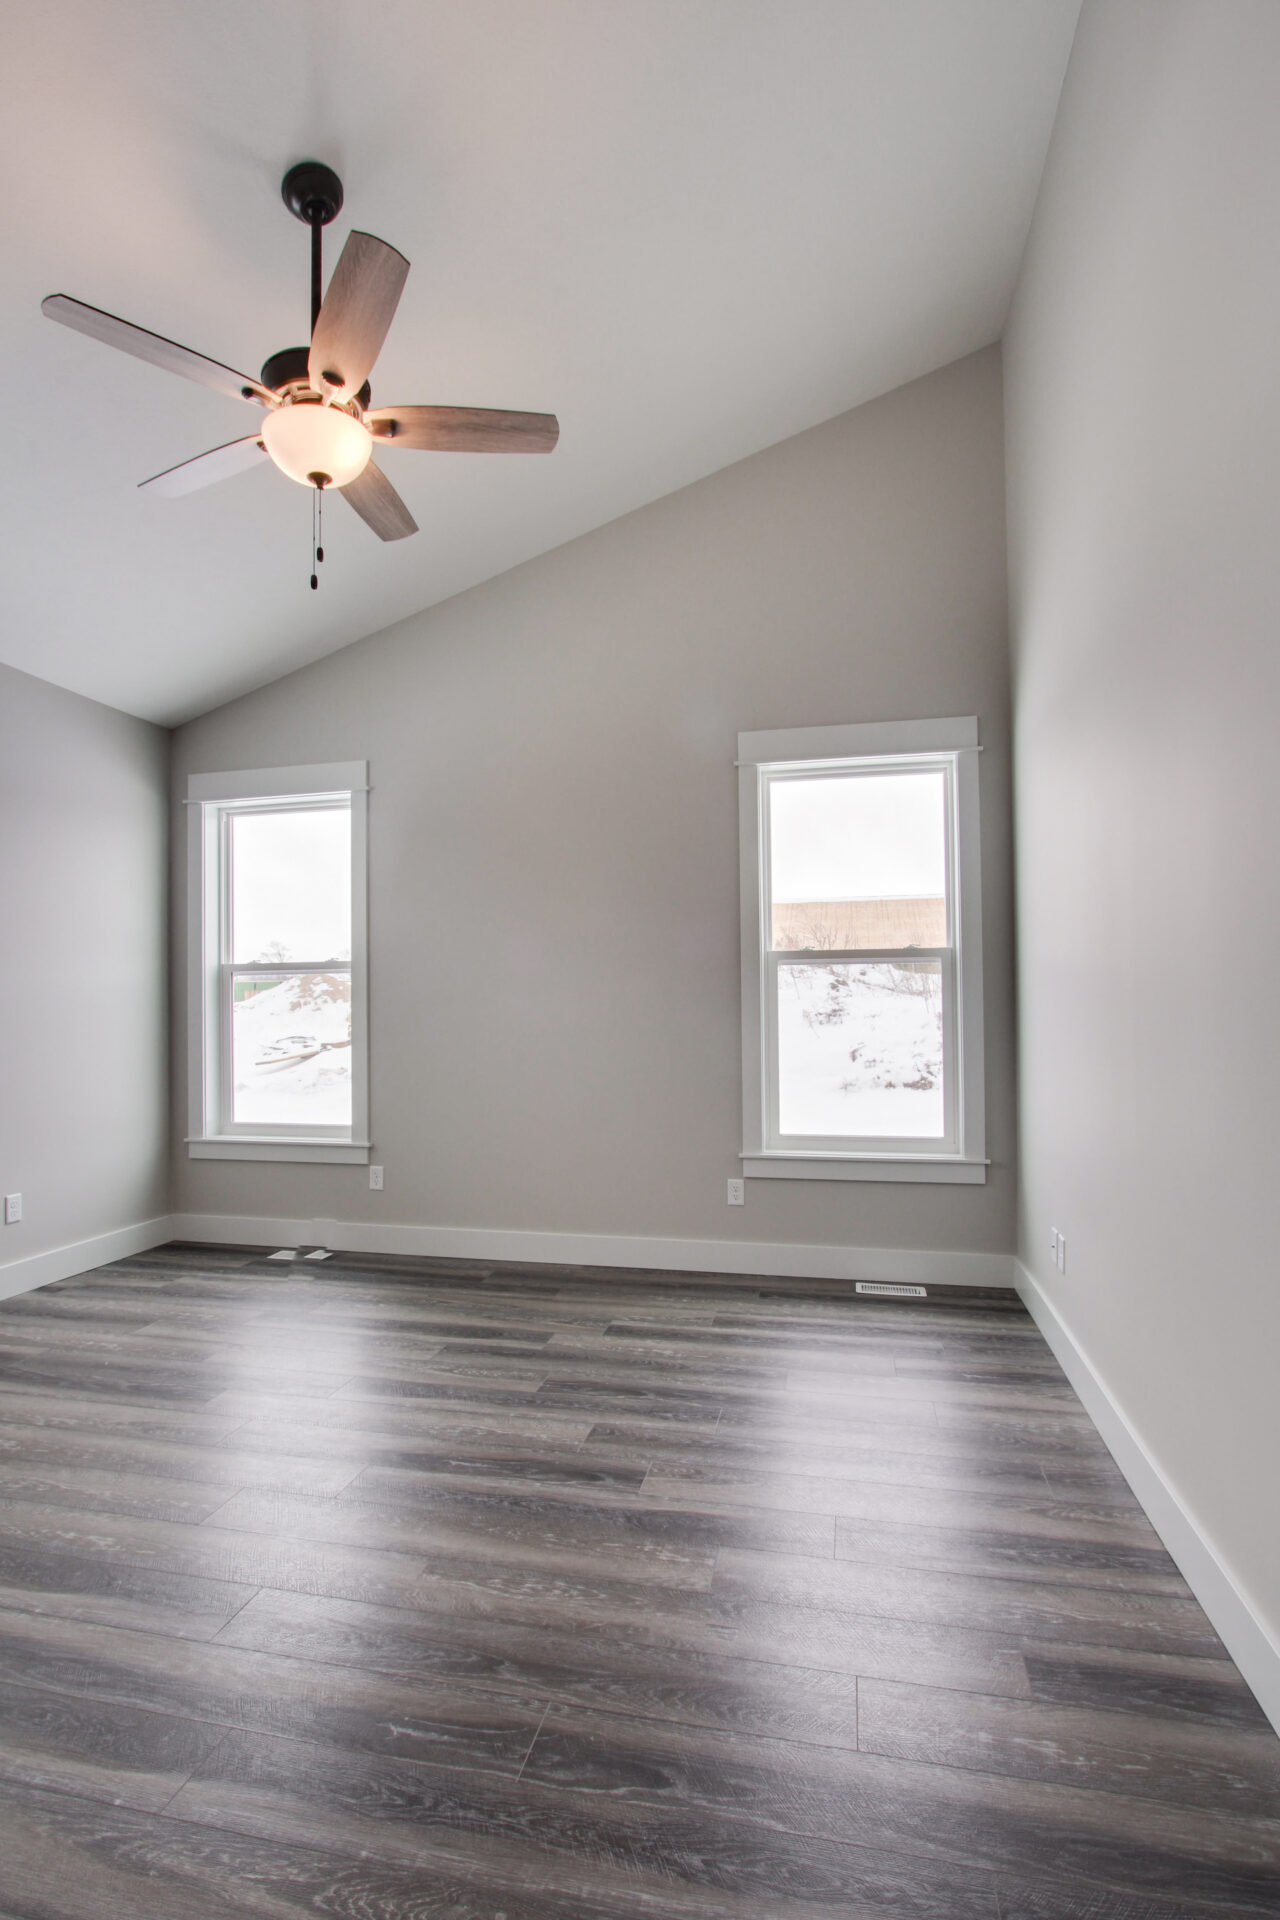 Light colour empty bedroom in a new construction house with a ceiling fan